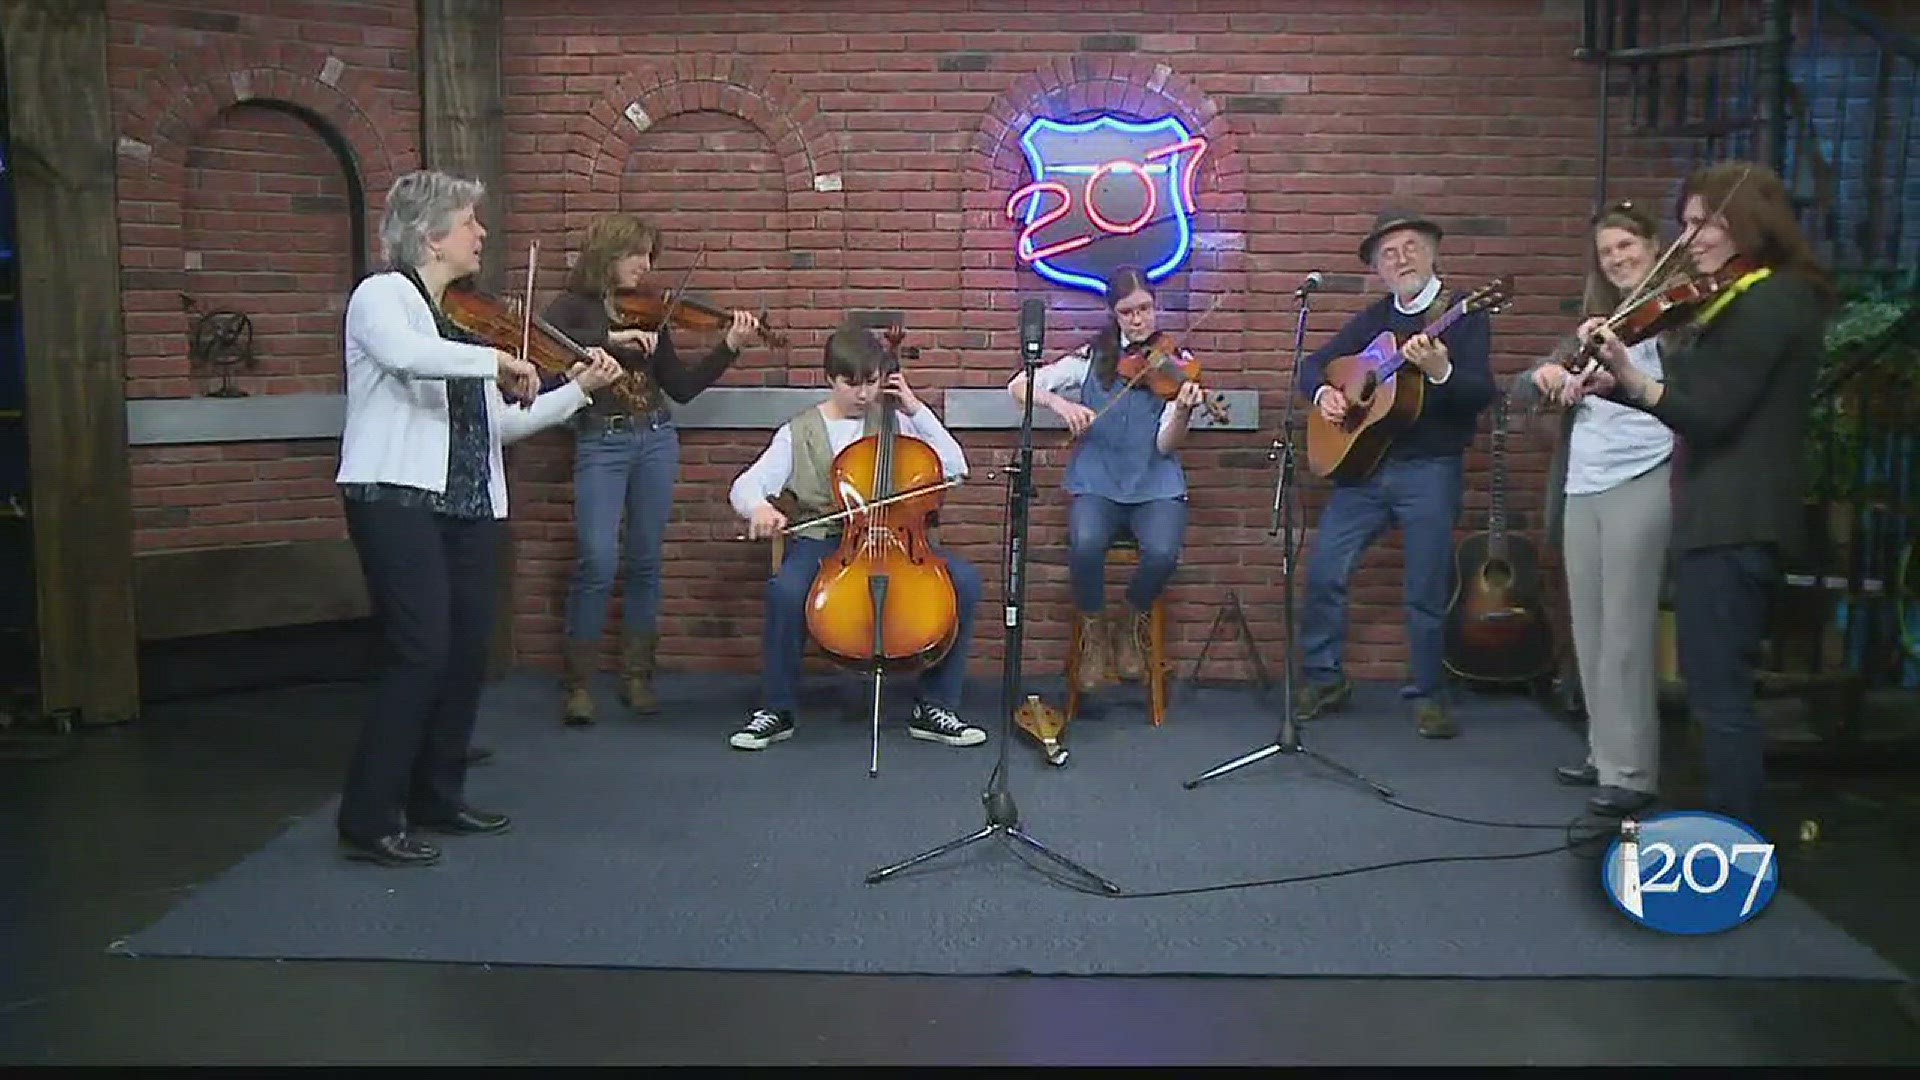 The New Hampshire Fiddle Ensemble is made up of 65 (or so) regular members. They play together and also do tricks, like the Harlem Globetrotters of stringed instruments.